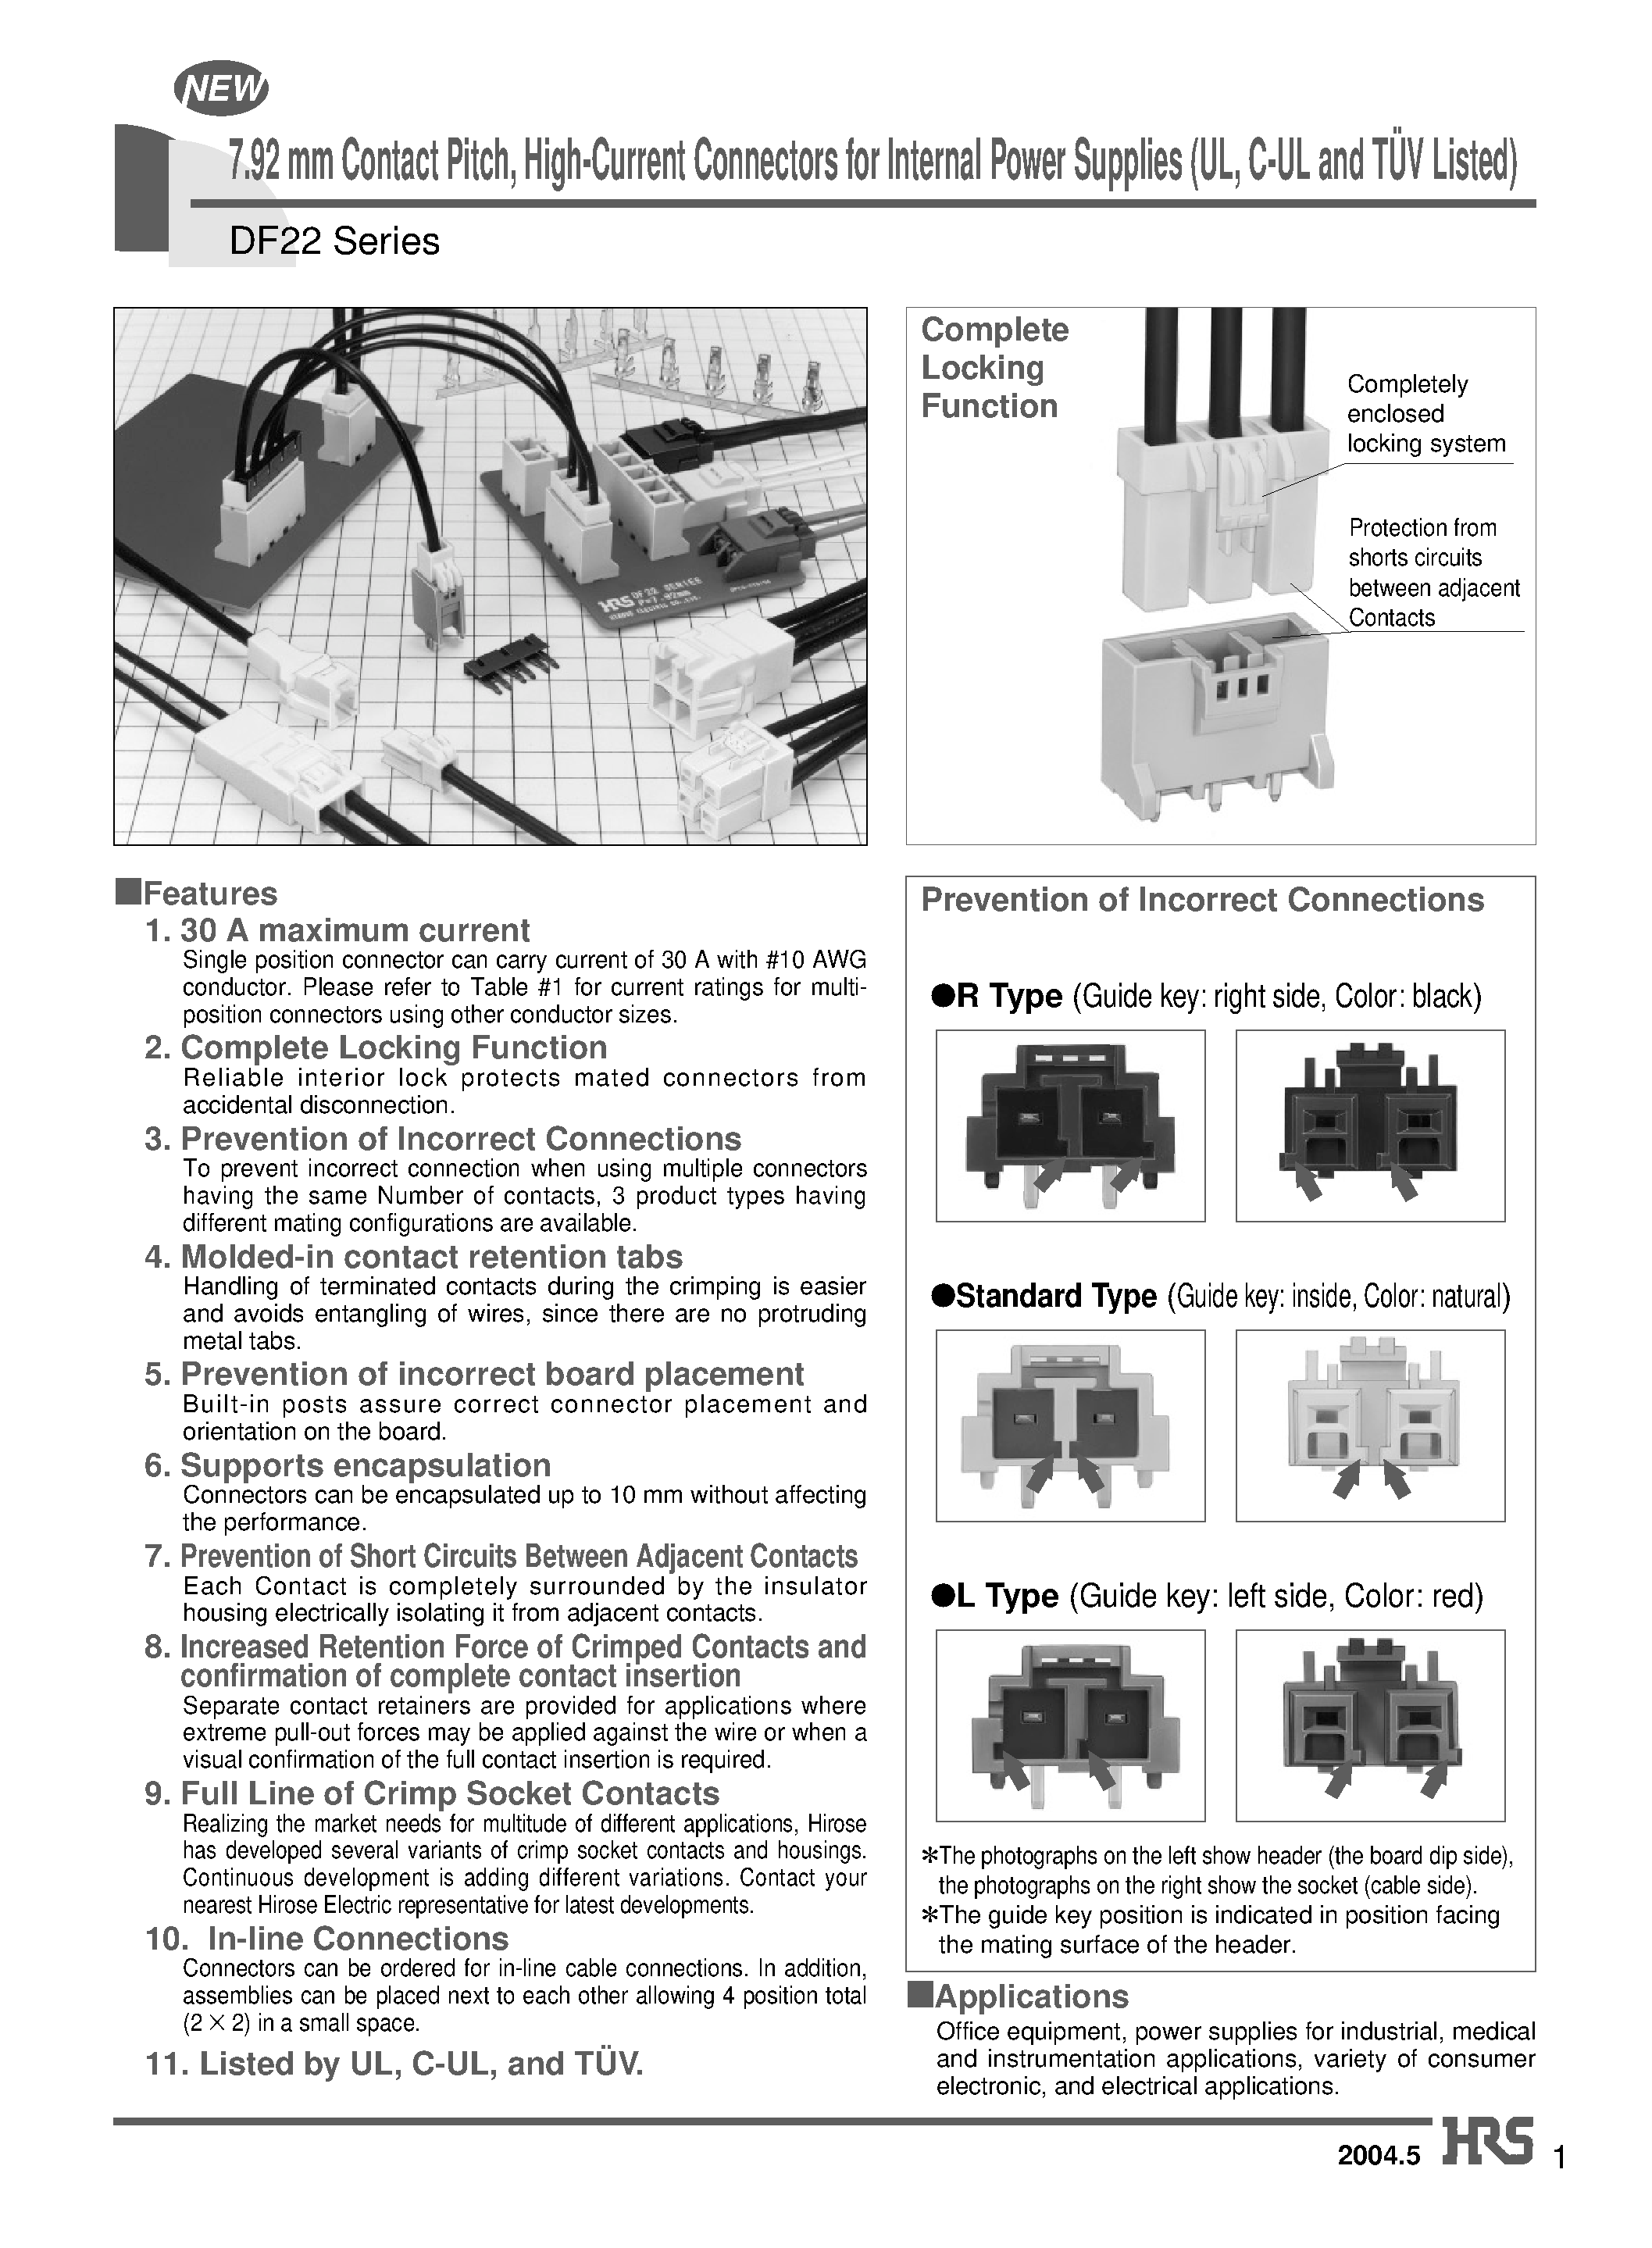 Datasheet DF22A-5EP-7.92DSA - 7.92 mm Contact Pitch/ High-Current Connectors for Internal Power Supplies (UL/ C-UL and TUV Listed) page 1